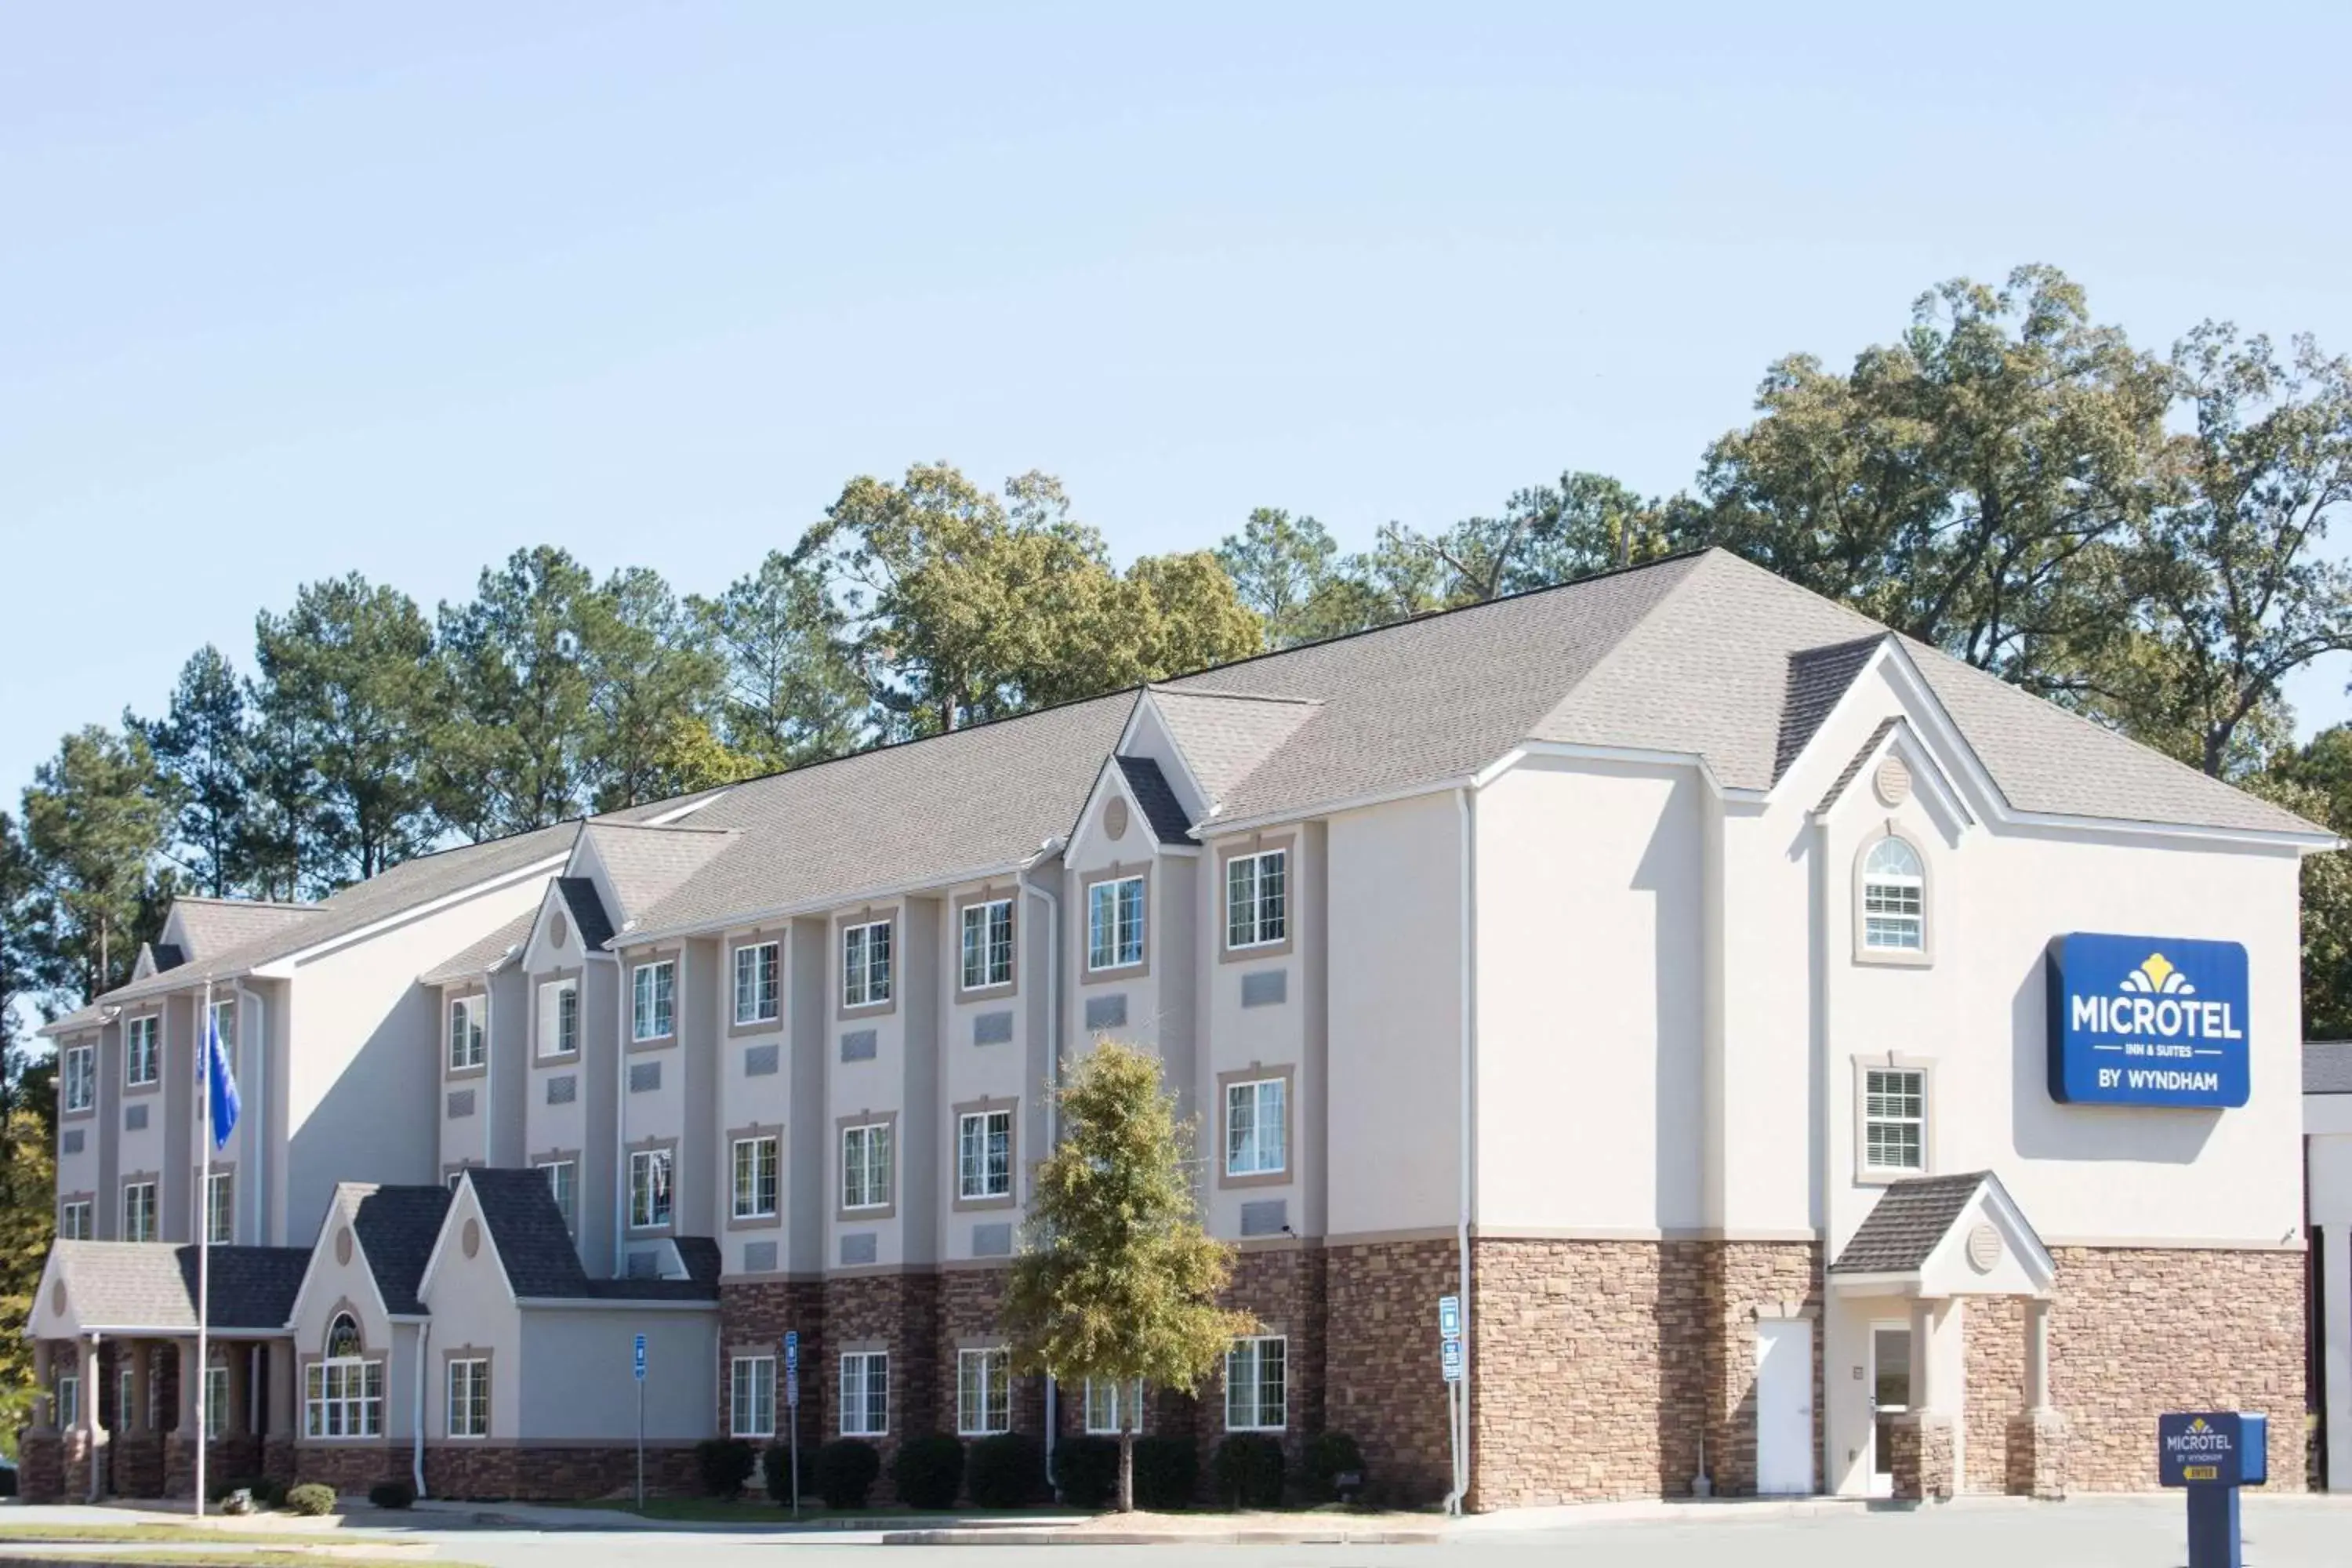 Property building in Microtel Inn & Suites by Wyndham Macon